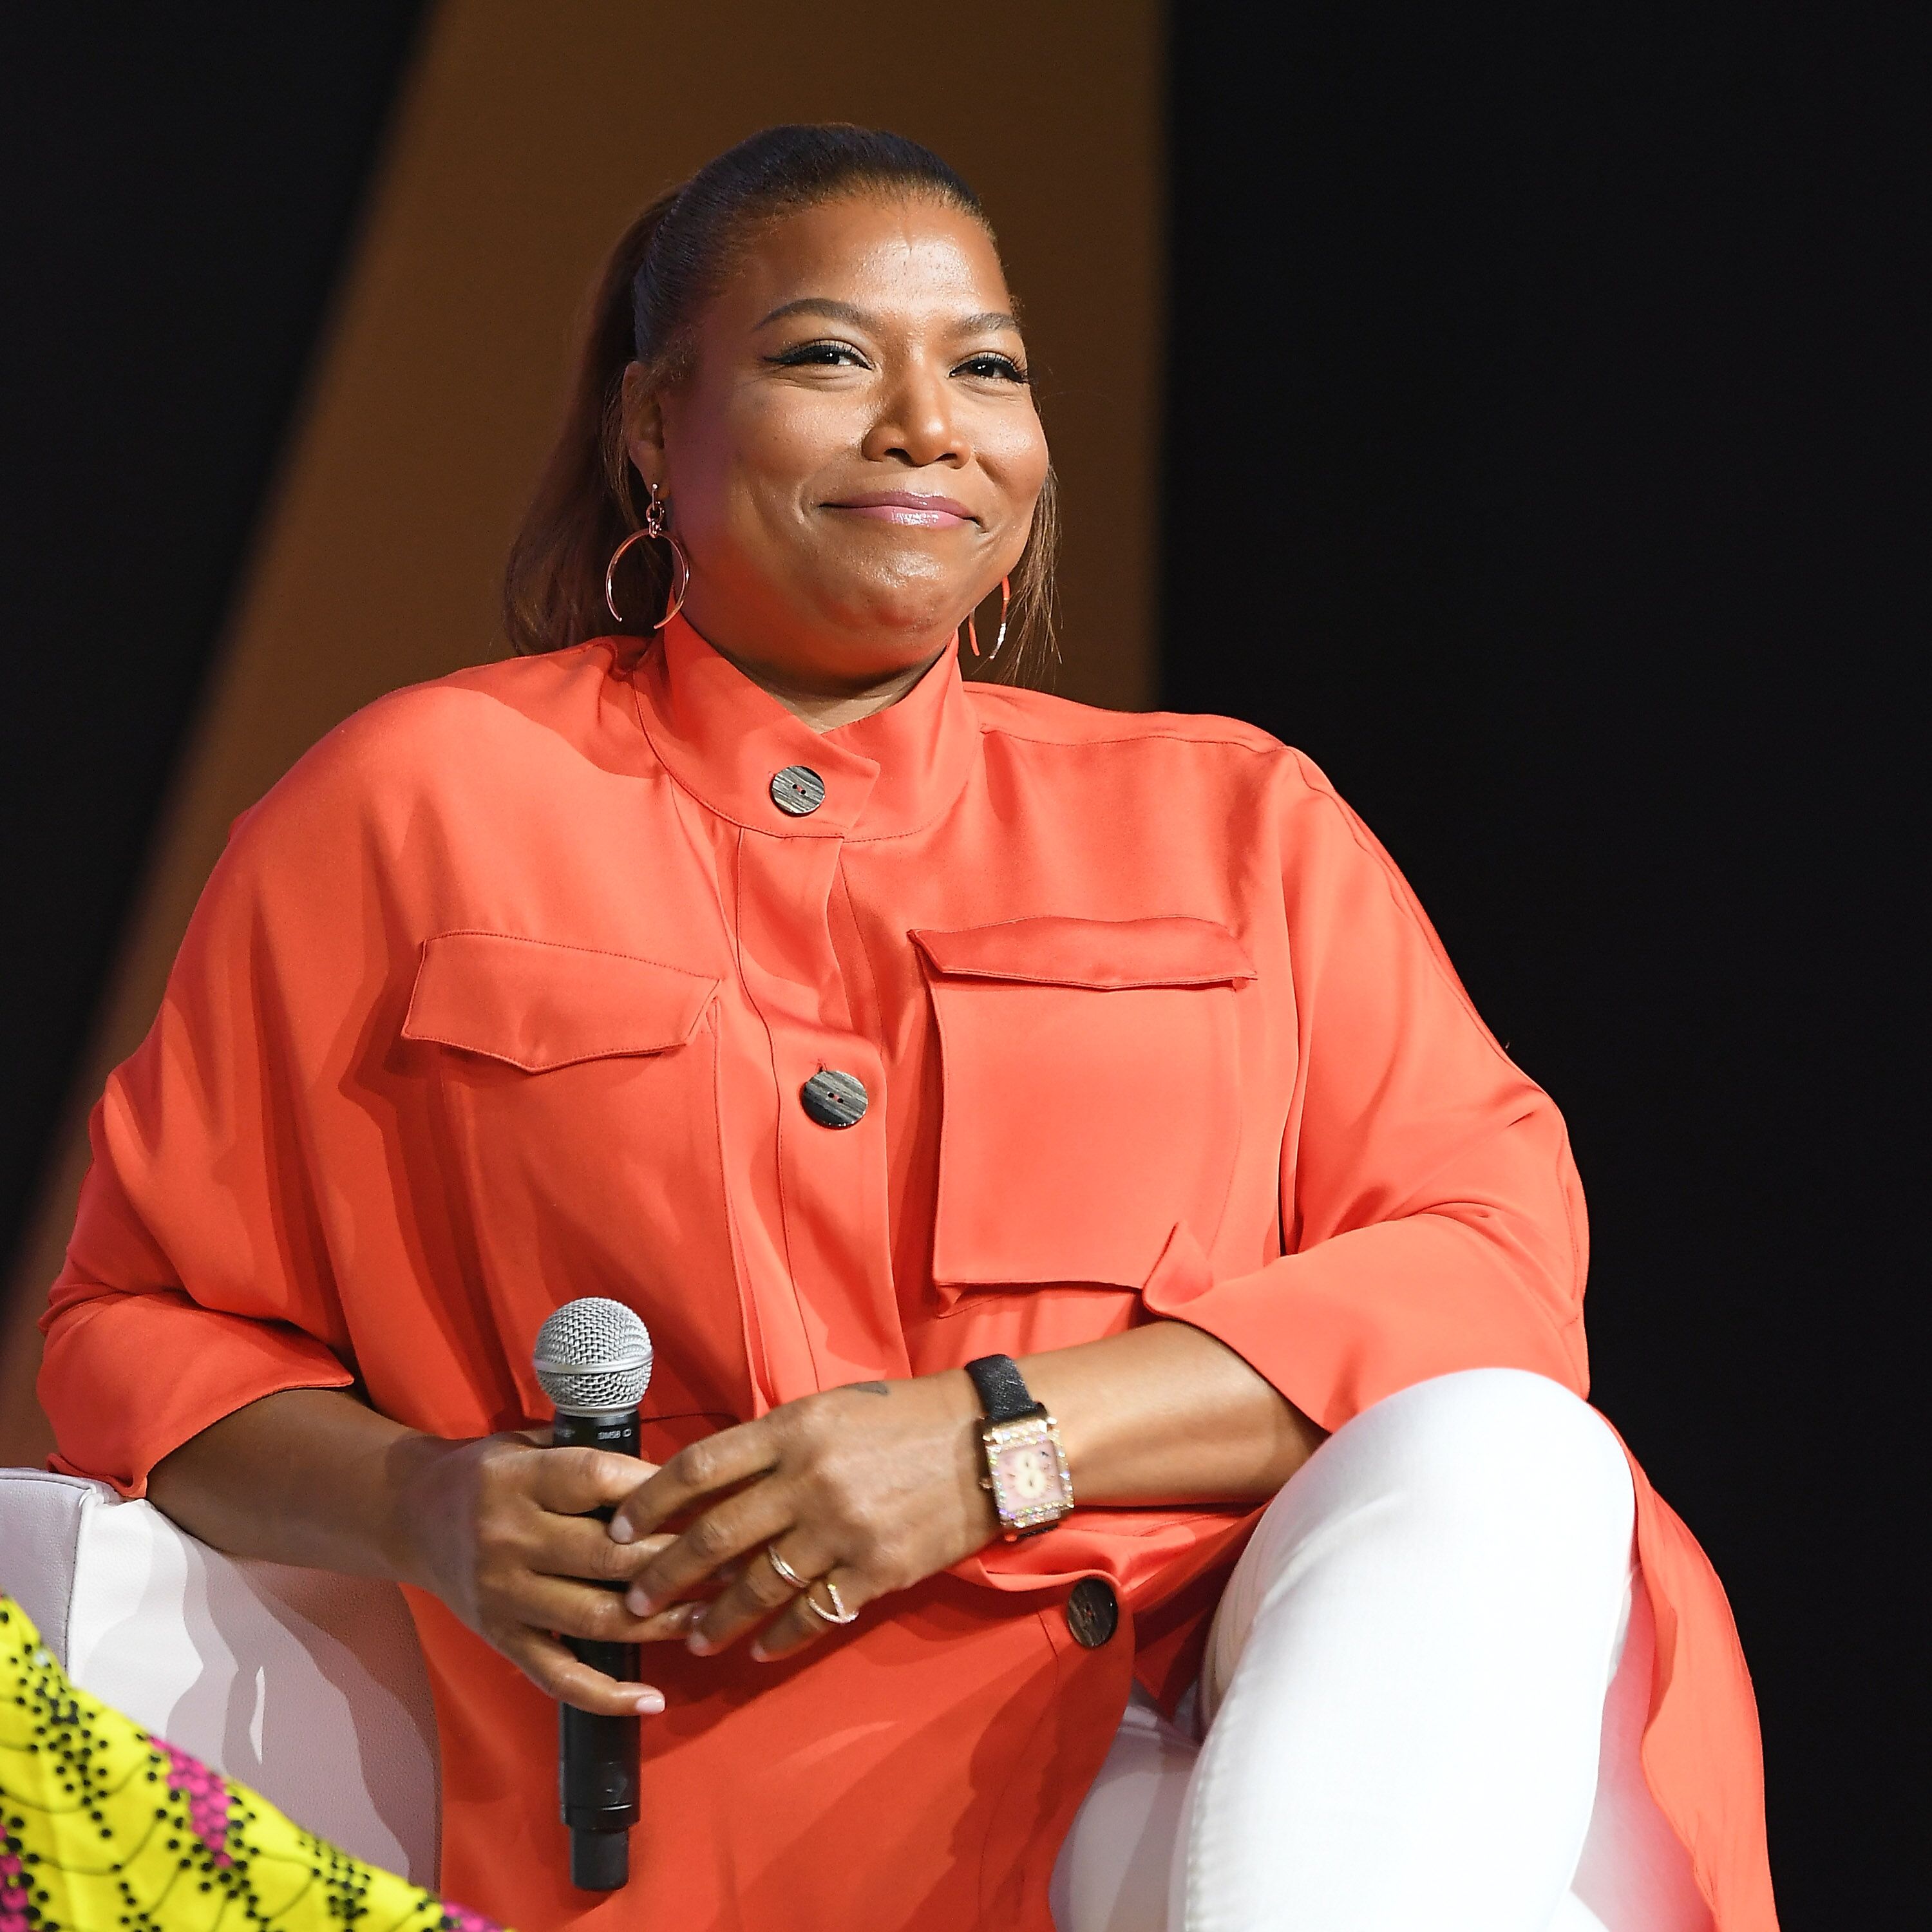 Queen Latifah speaks onstage during the 2018 Essence Festival presented by Coca-Cola at Ernest N. Morial Convention Center on July 6, 2018 | Photo: Getty Images